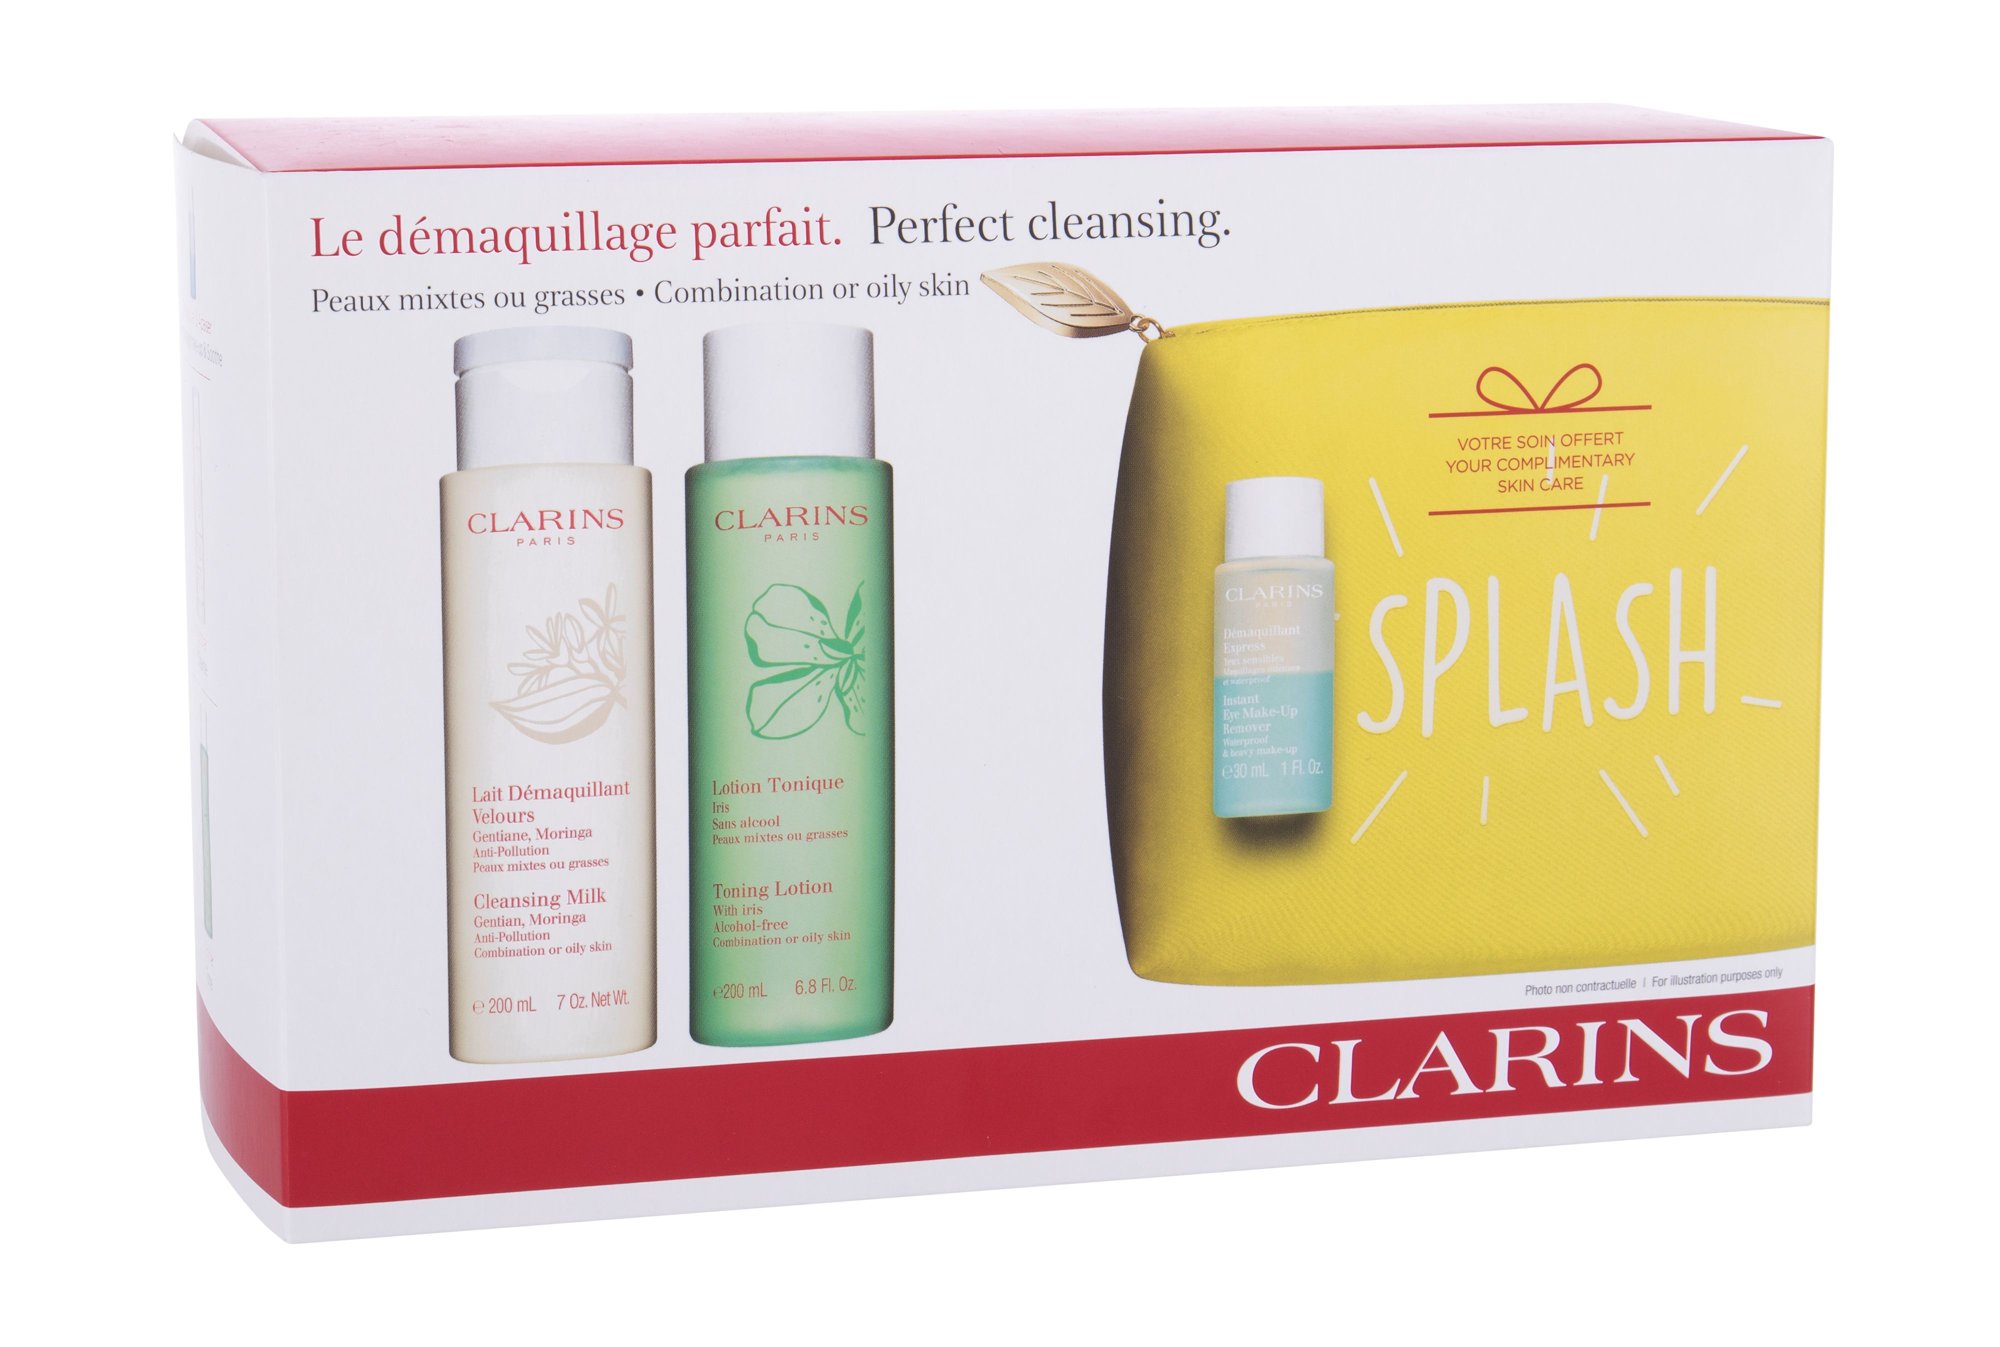 Clarins Cleansing Milk With Gentian 200ml Cleansing Milk 200 ml + Toning Lotion 200 ml + Eye MakeUp Remover 30 ml + Cosmetic Bag veido pienelis  Rinkinys